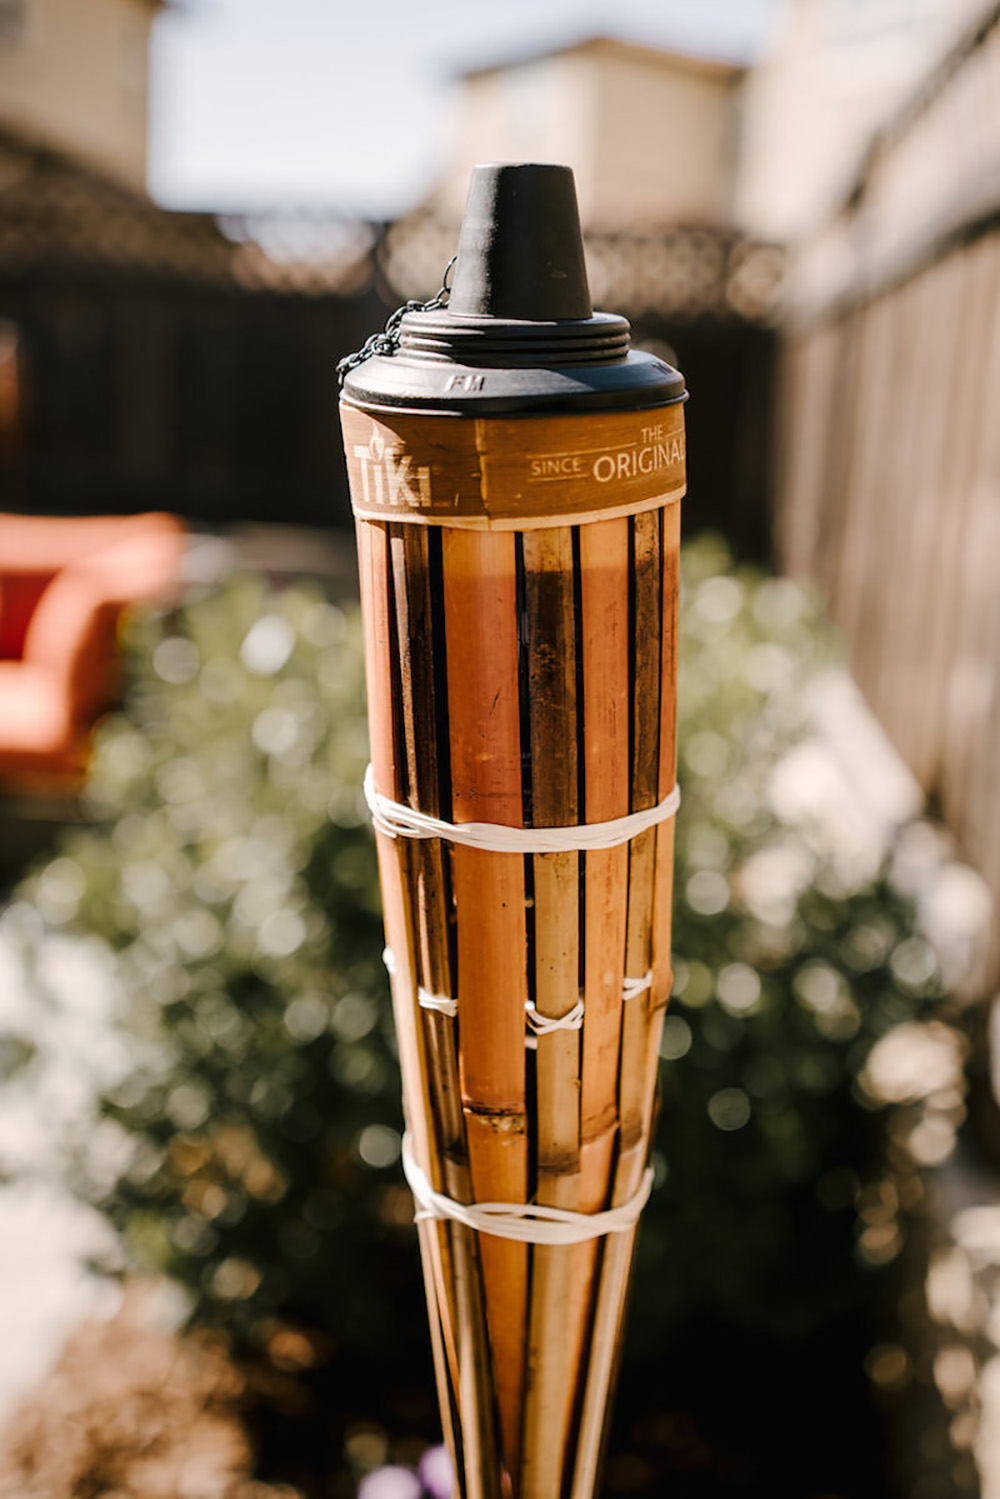 A tiki light with greenery and patio furniture in the background.